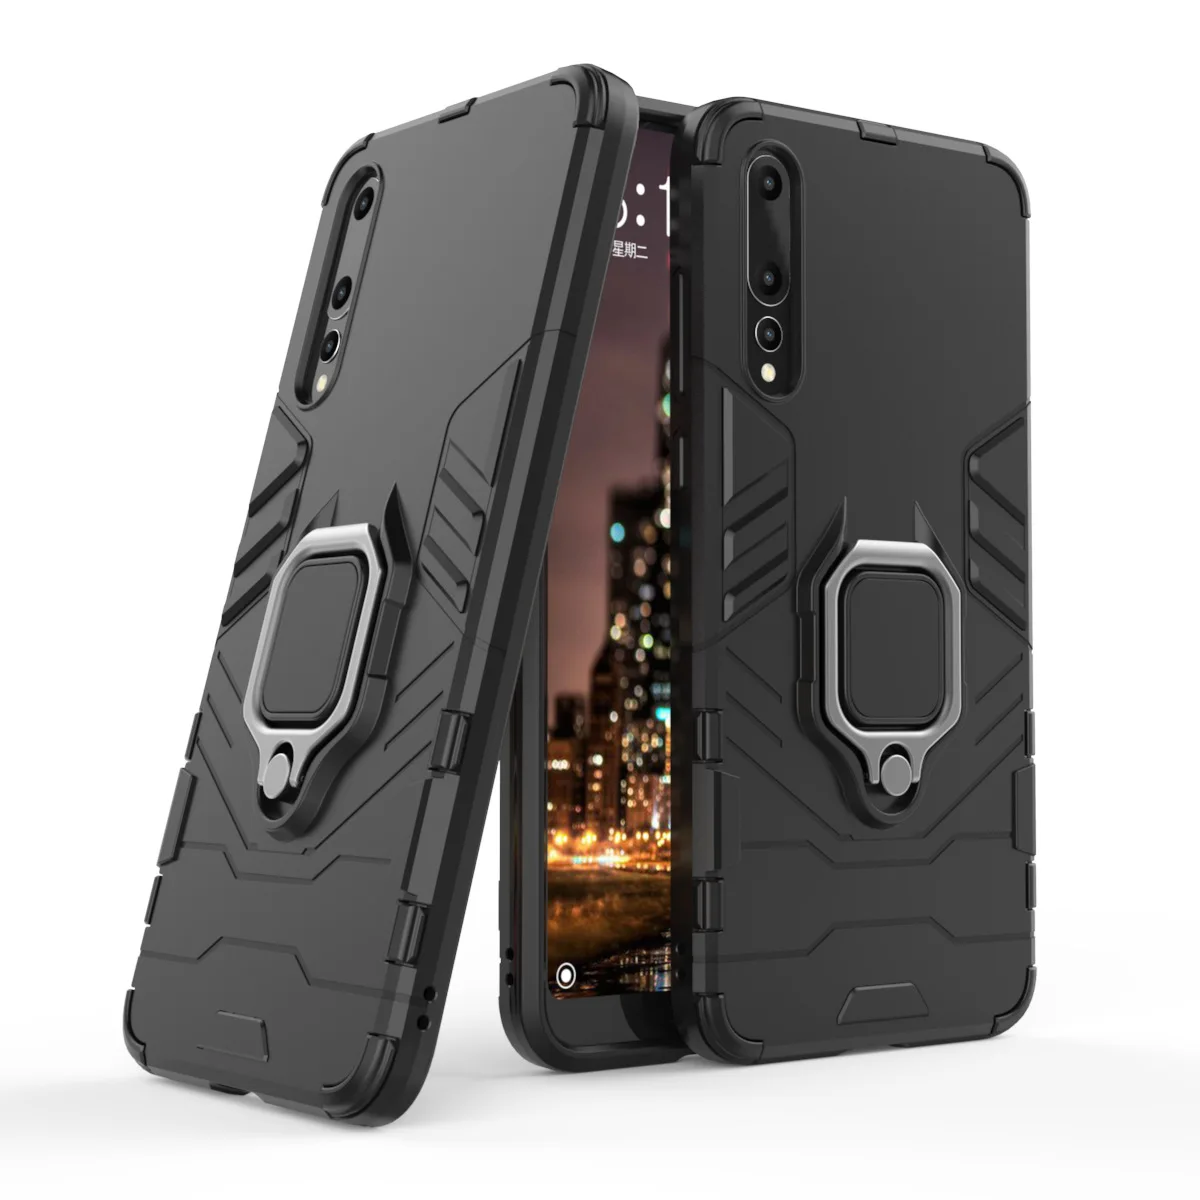 

Armor Shockproof Ring Holder Case For Huawei P20 P20 Pro Hard PC Soft TPU Hybrid Rugged Back Cover